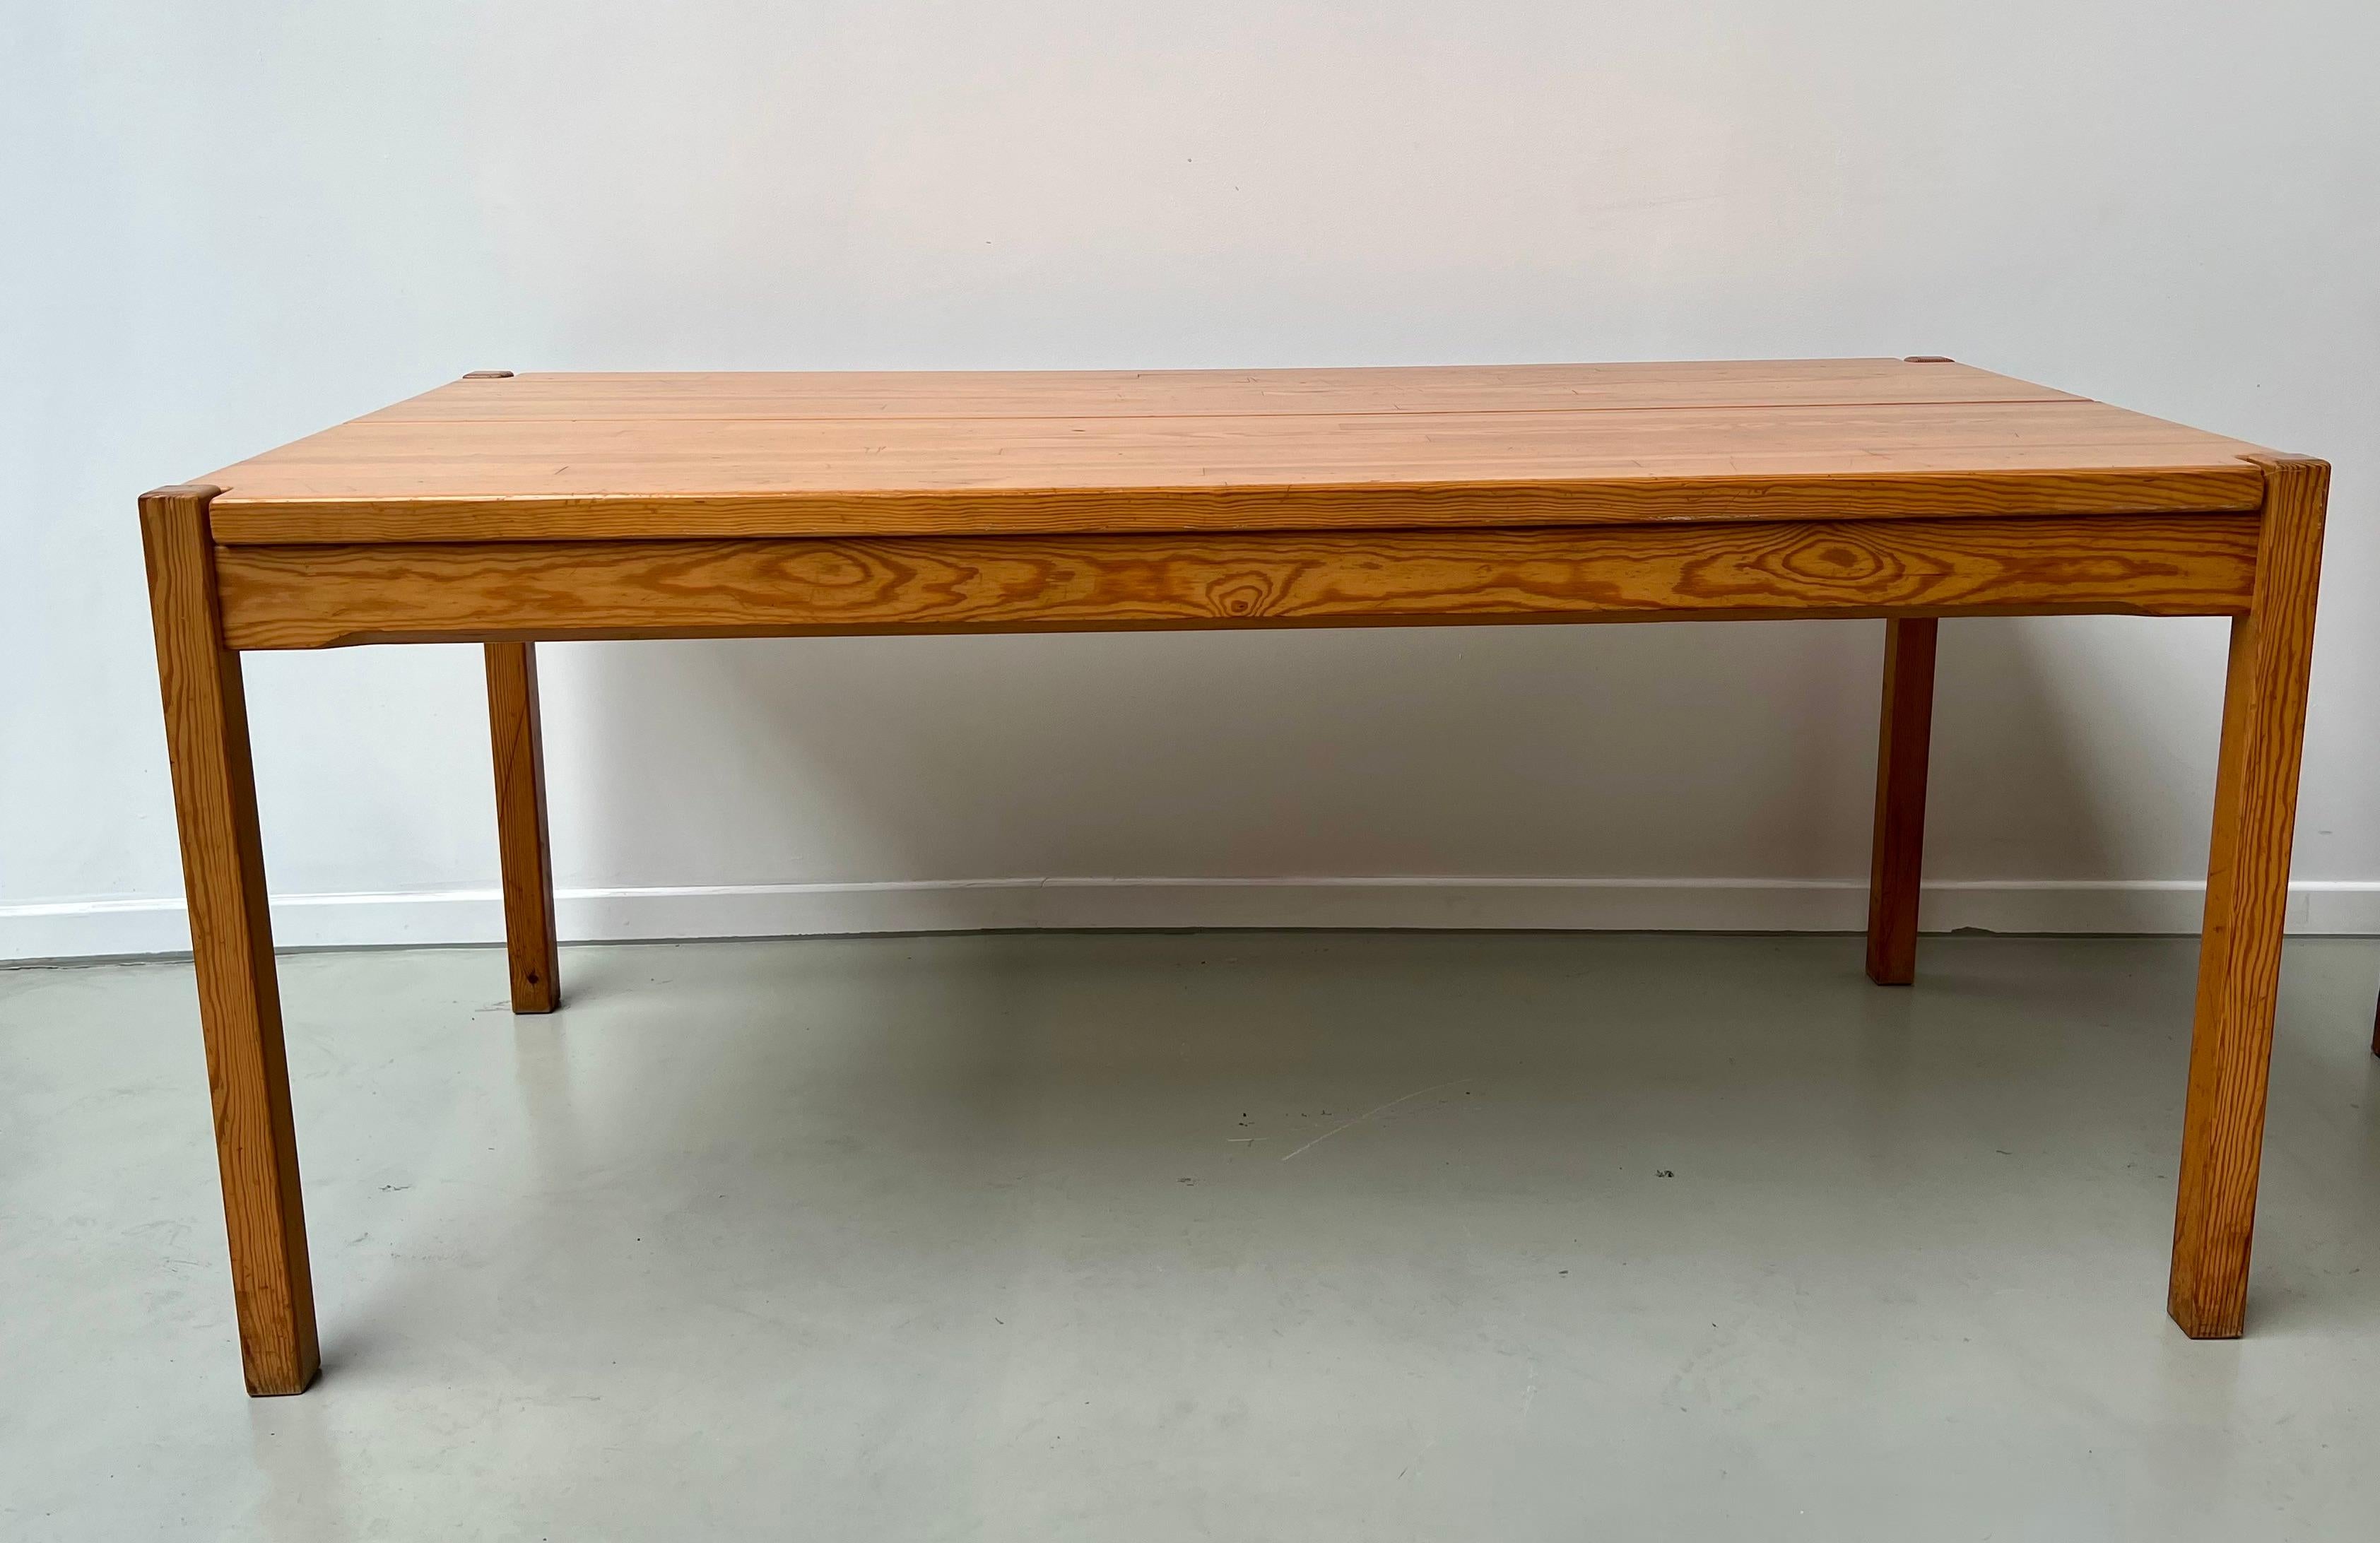 Beautiful in its simplicity, this model Hongisto model by Finnish designer Ilmari Tapiovaara can accommodate 6 people.
Rectangular in shape, it is in solid pine.
Edition: Laukaan Pu, Circa 1960
Original patina attesting to its experience but all